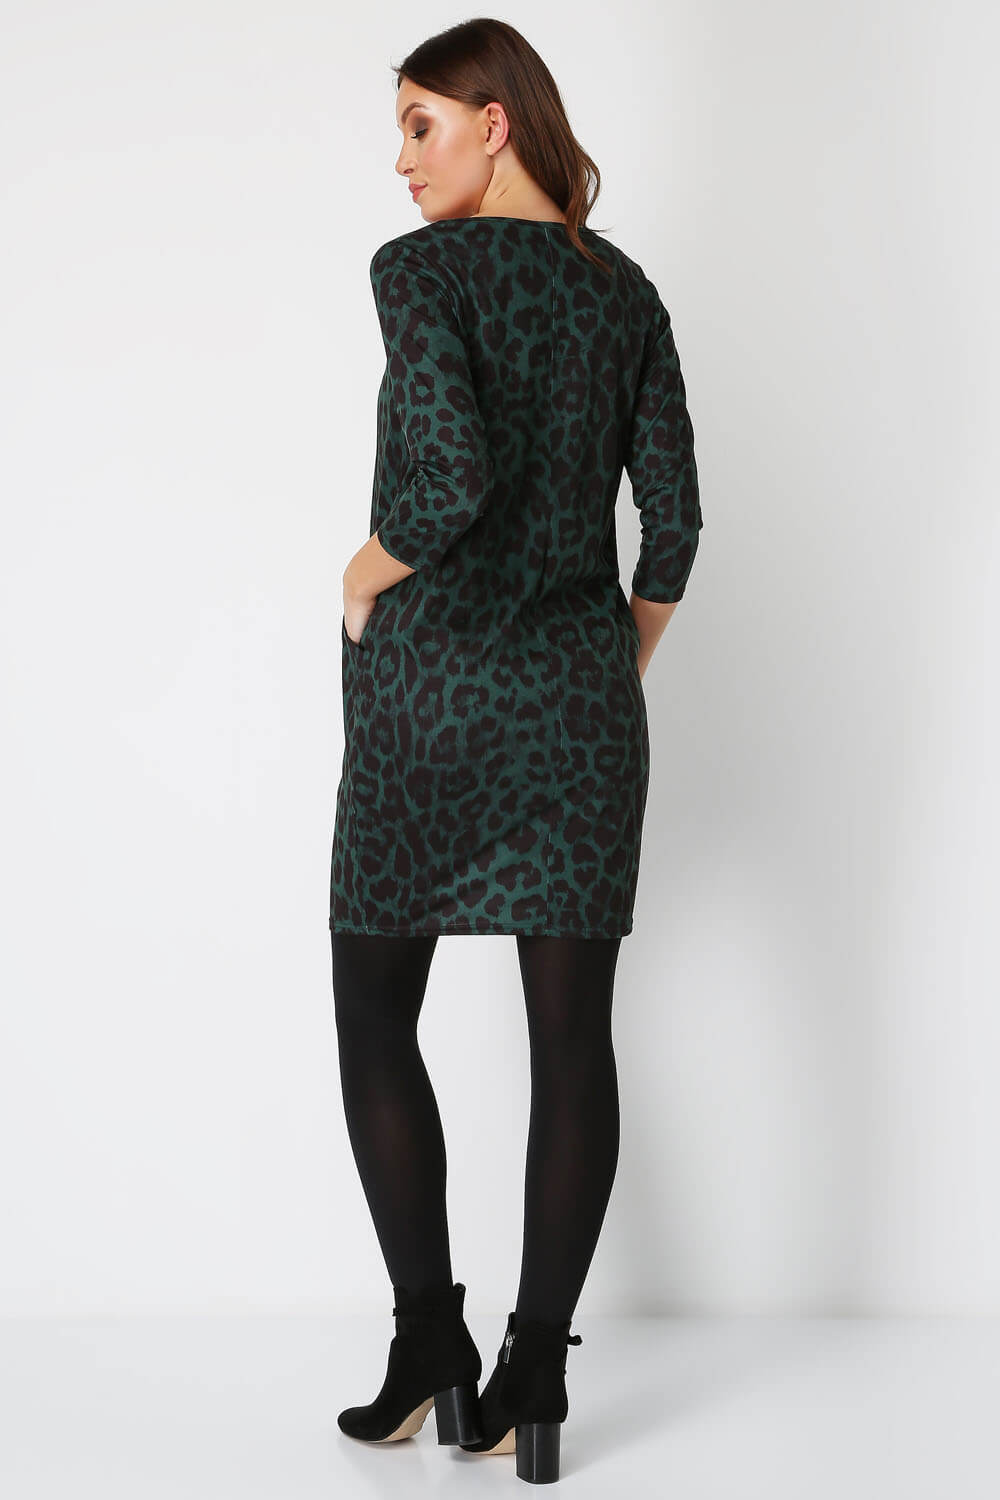 Green Animal Leopard Print Slouch Dress, Image 3 of 5